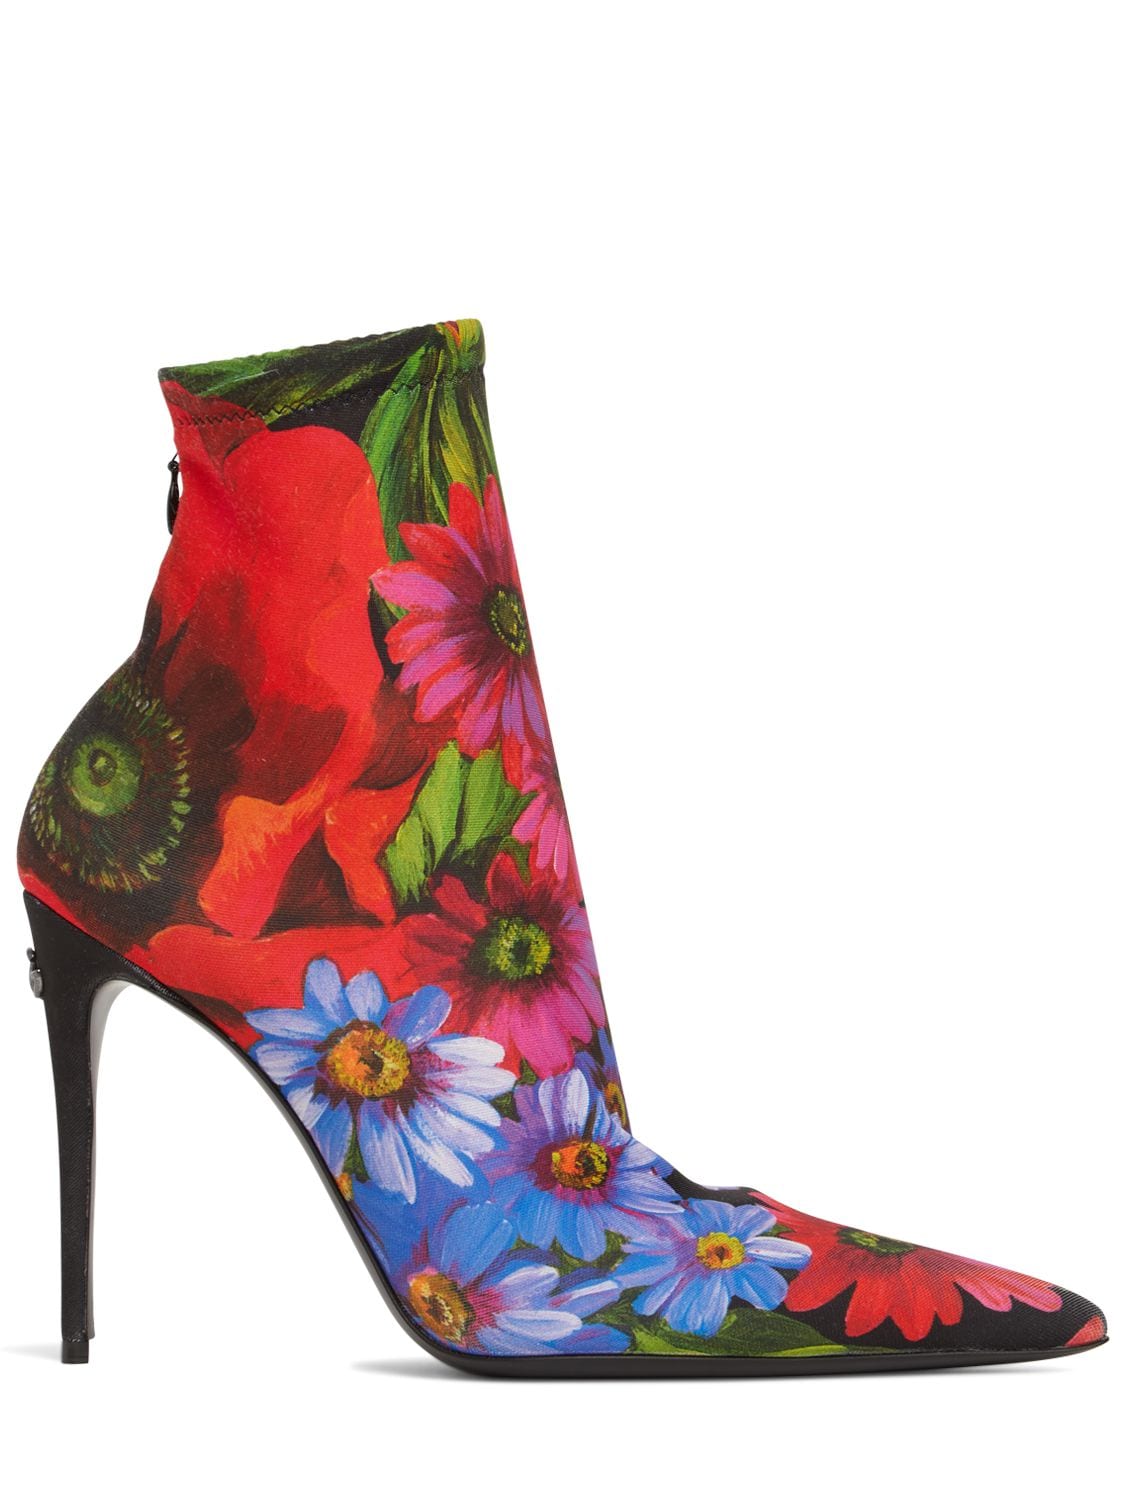 Dolce & Gabbana 105mm Printed Jersey Ankle Boots In Prato Fdo Nero